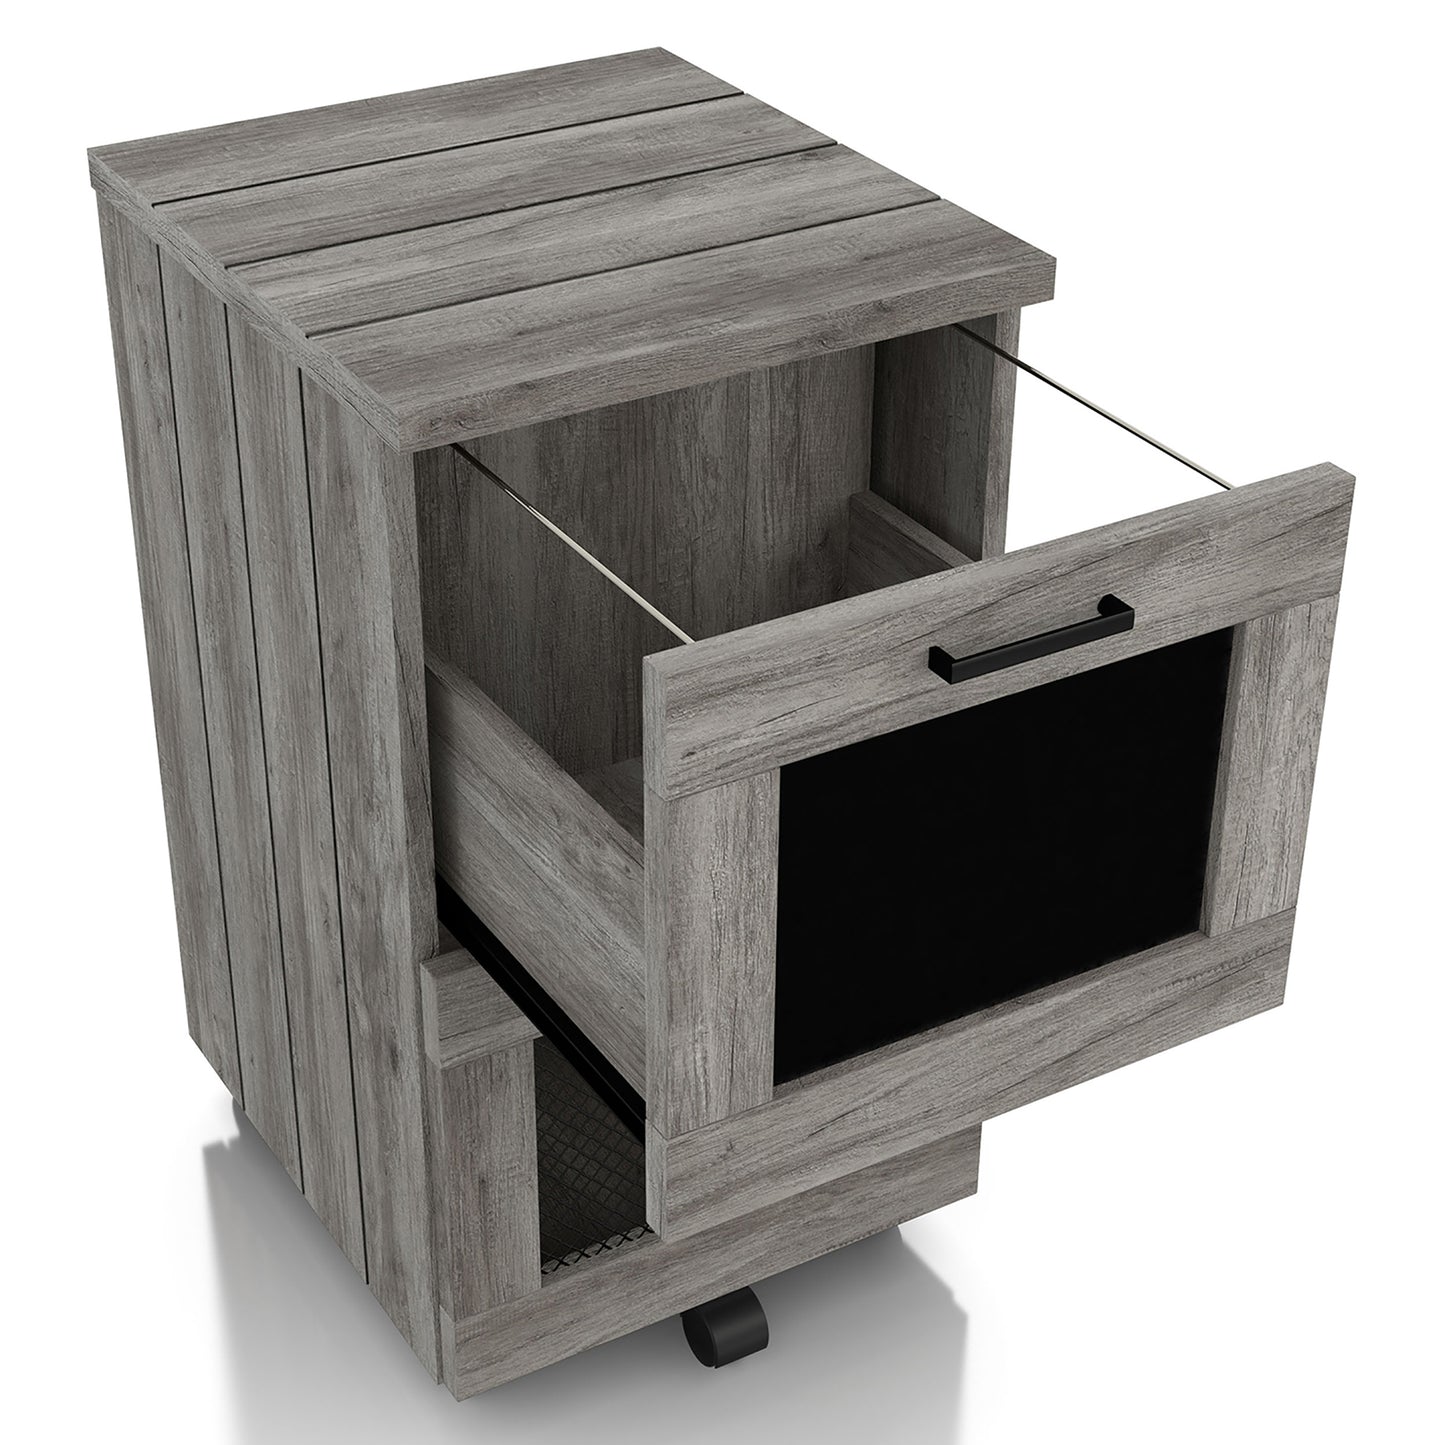 Right angled rustic vintage gray oak two-drawer mobile file cabinet with mesh and chalkboard drawer fronts and top drawer open on a white background